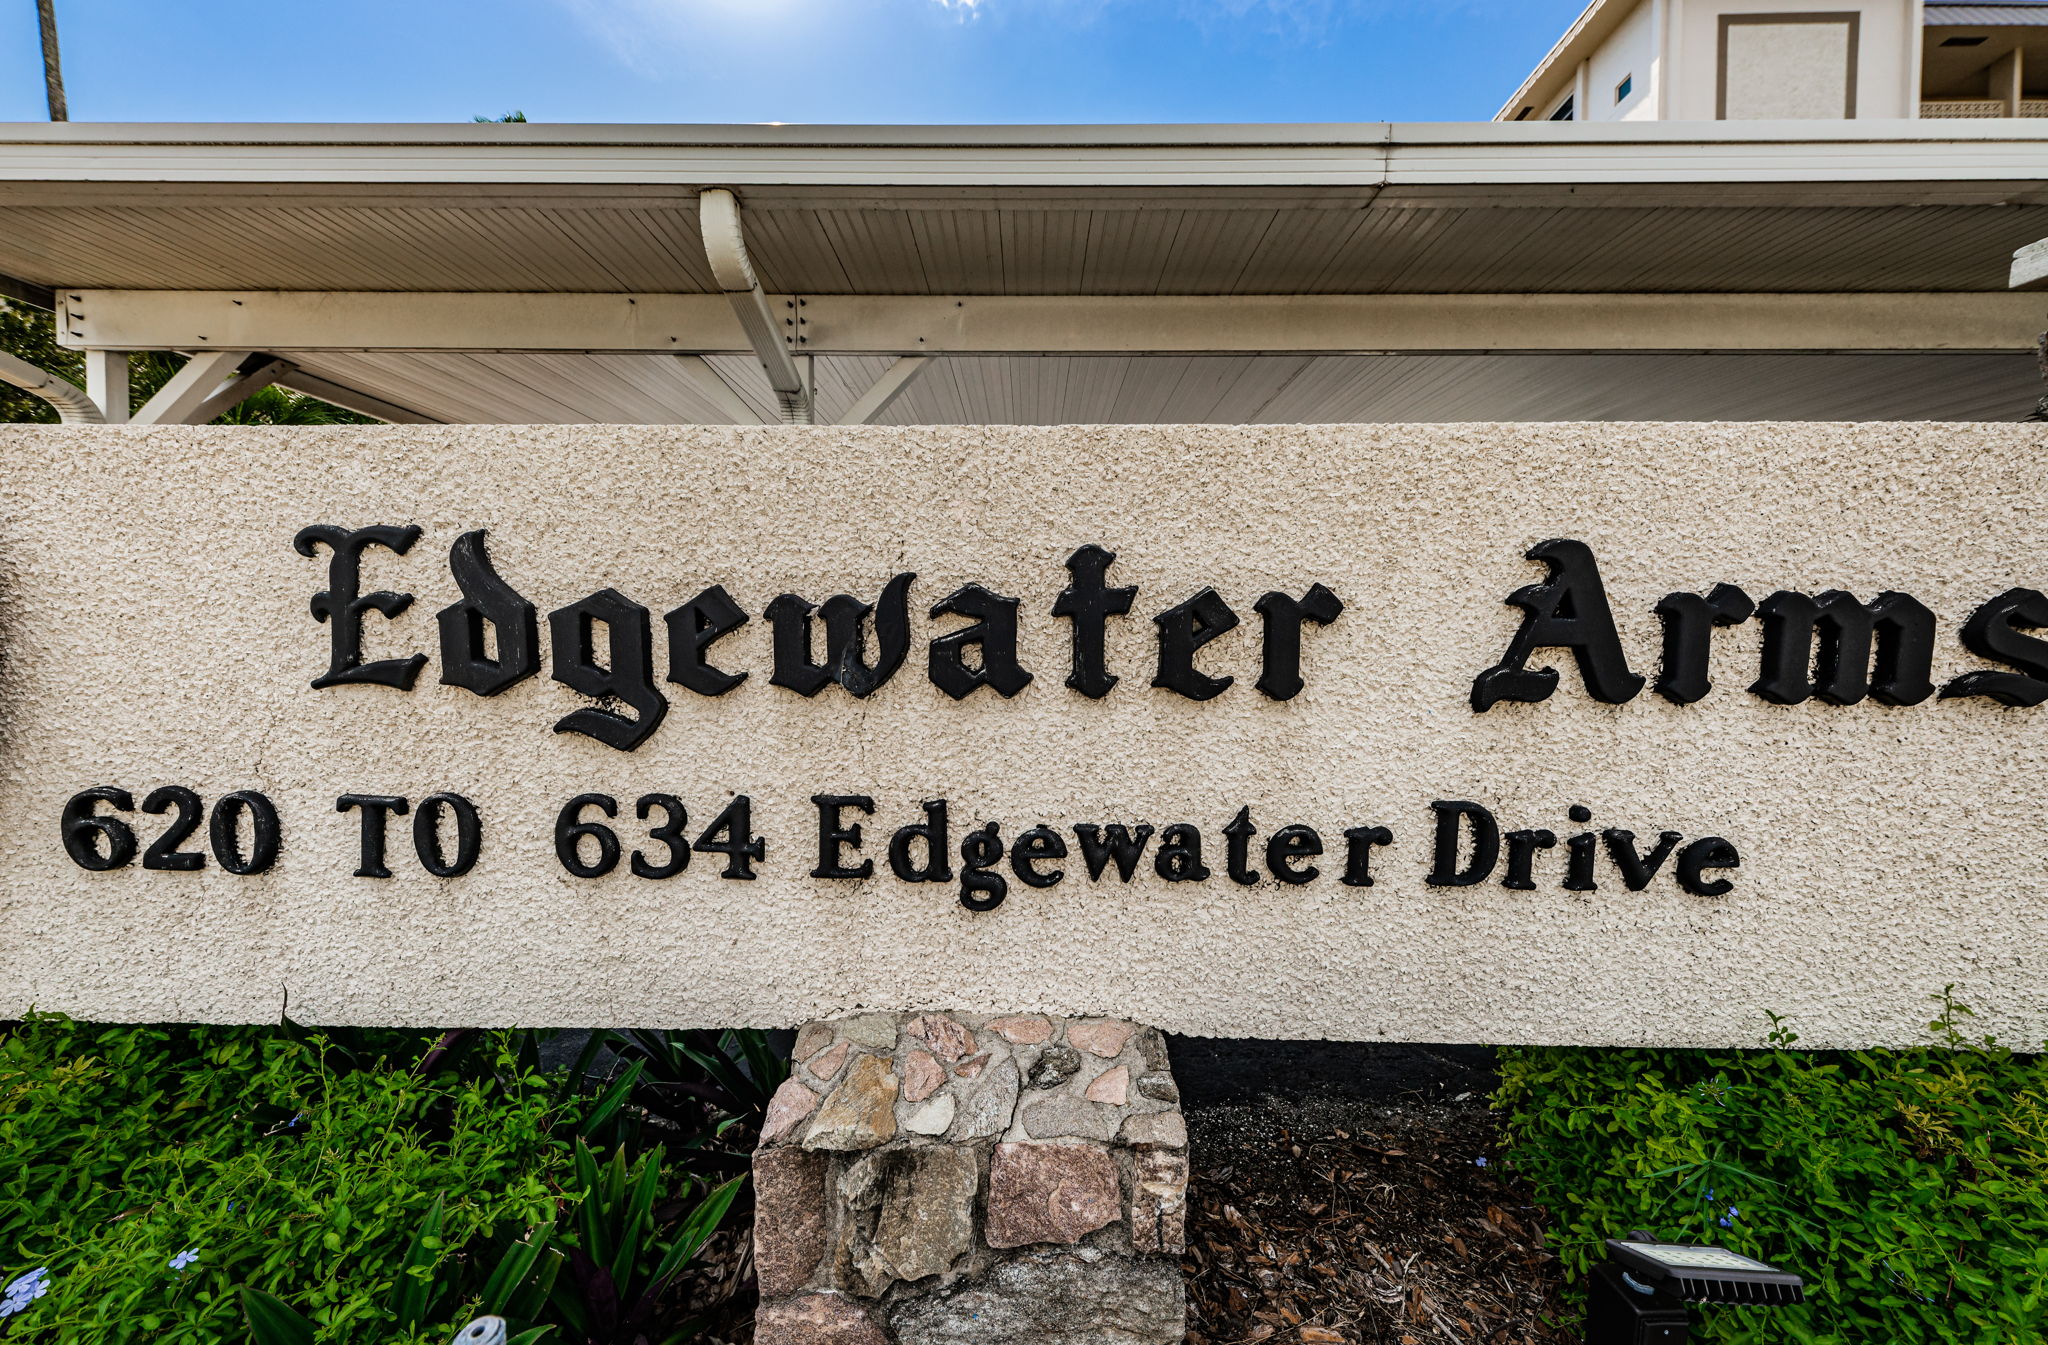 141-Edgewater Arms